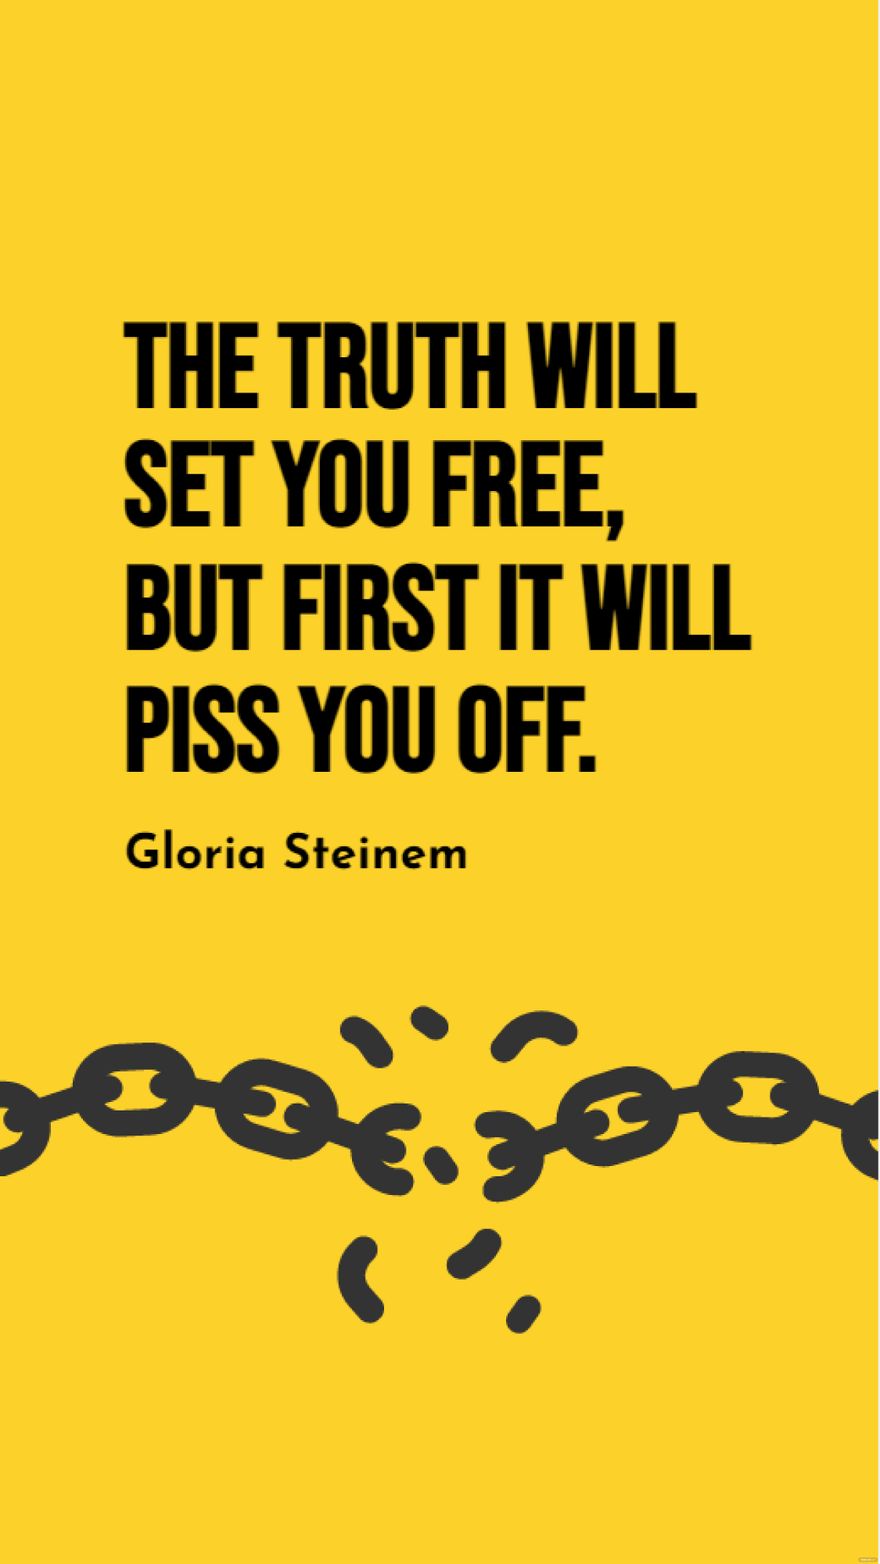 Gloria Steinem - The truth will set you free, but first it will piss you off.